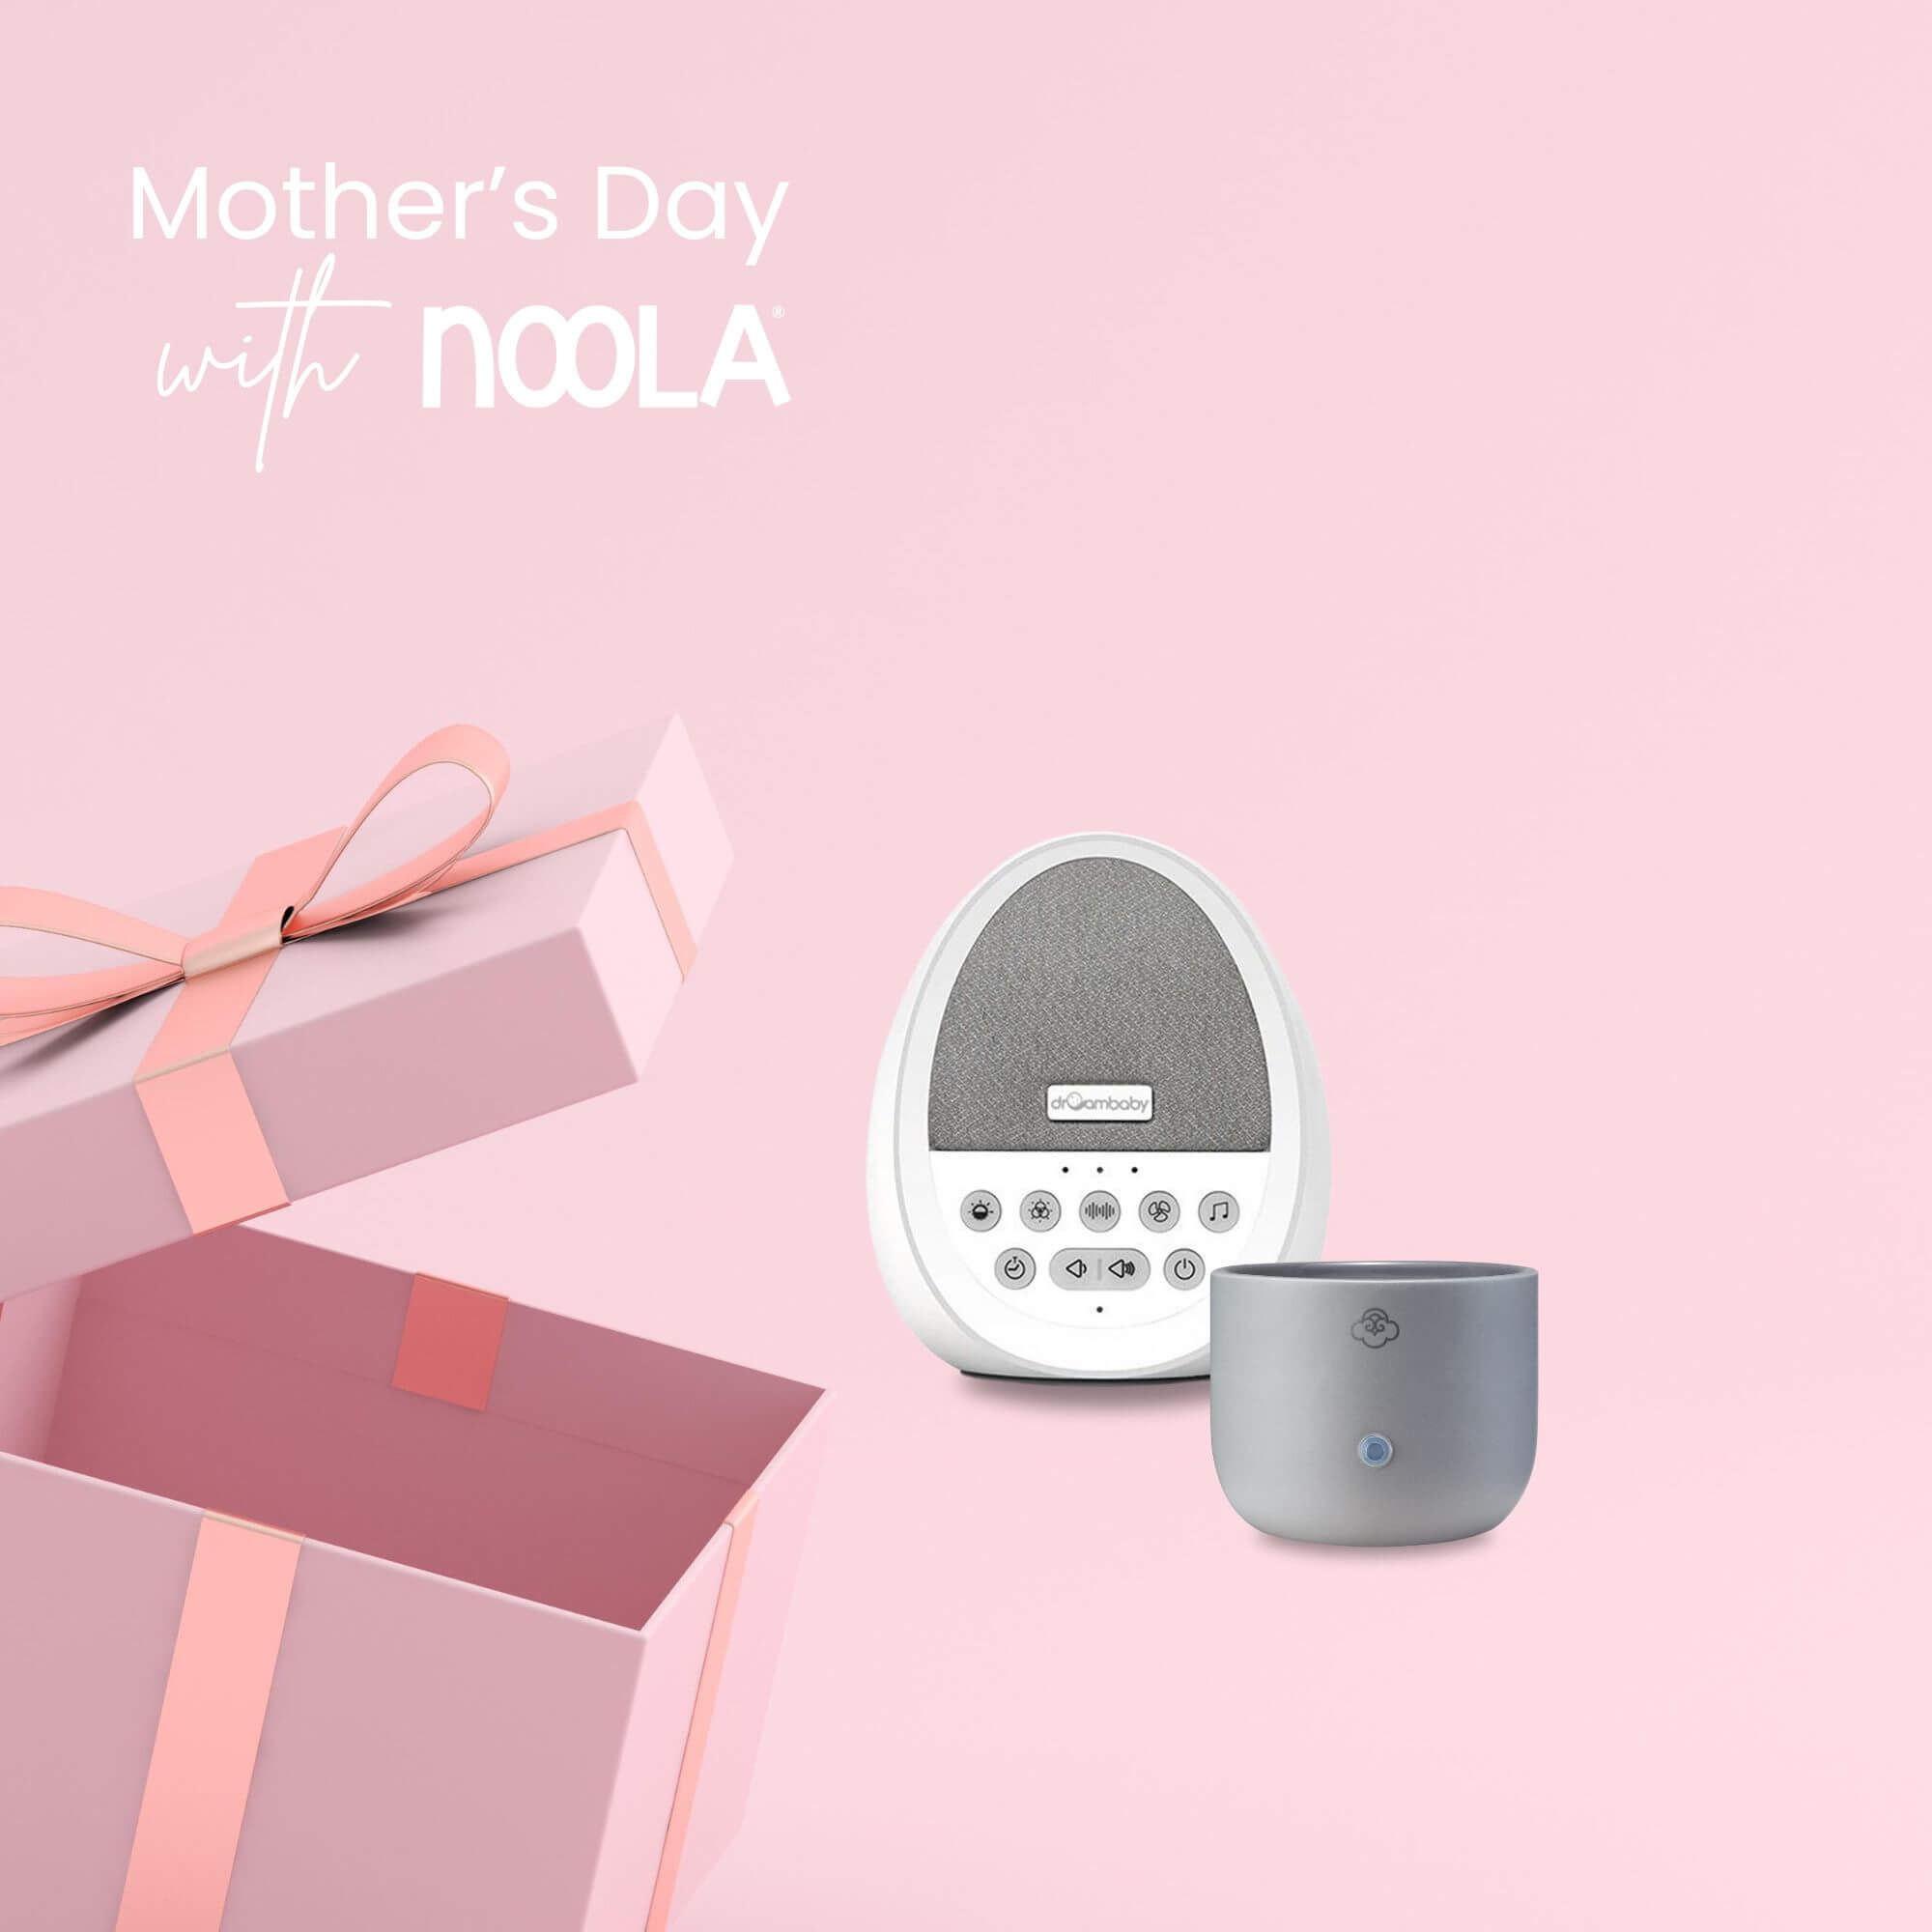 noola mothersday gift box bundle dreambaby white noise machine baby soother and serene aromatic fragrance diffuser grey